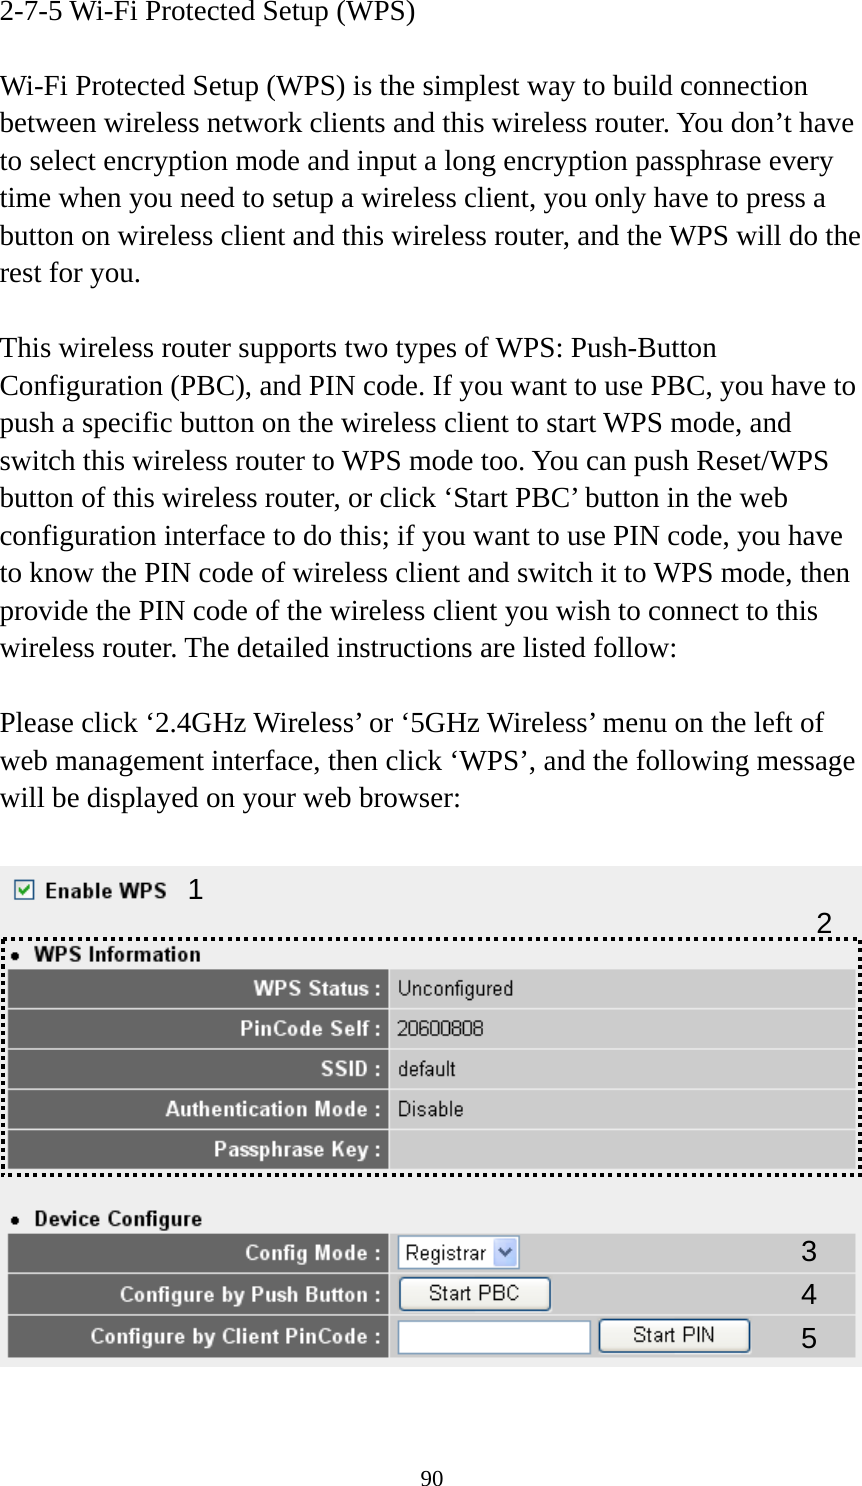 90 2-7-5 Wi-Fi Protected Setup (WPS)  Wi-Fi Protected Setup (WPS) is the simplest way to build connection between wireless network clients and this wireless router. You don’t have to select encryption mode and input a long encryption passphrase every time when you need to setup a wireless client, you only have to press a button on wireless client and this wireless router, and the WPS will do the rest for you.  This wireless router supports two types of WPS: Push-Button Configuration (PBC), and PIN code. If you want to use PBC, you have to push a specific button on the wireless client to start WPS mode, and switch this wireless router to WPS mode too. You can push Reset/WPS button of this wireless router, or click ‘Start PBC’ button in the web configuration interface to do this; if you want to use PIN code, you have to know the PIN code of wireless client and switch it to WPS mode, then provide the PIN code of the wireless client you wish to connect to this wireless router. The detailed instructions are listed follow:  Please click ‘2.4GHz Wireless’ or ‘5GHz Wireless’ menu on the left of web management interface, then click ‘WPS’, and the following message will be displayed on your web browser:    1 34 25 